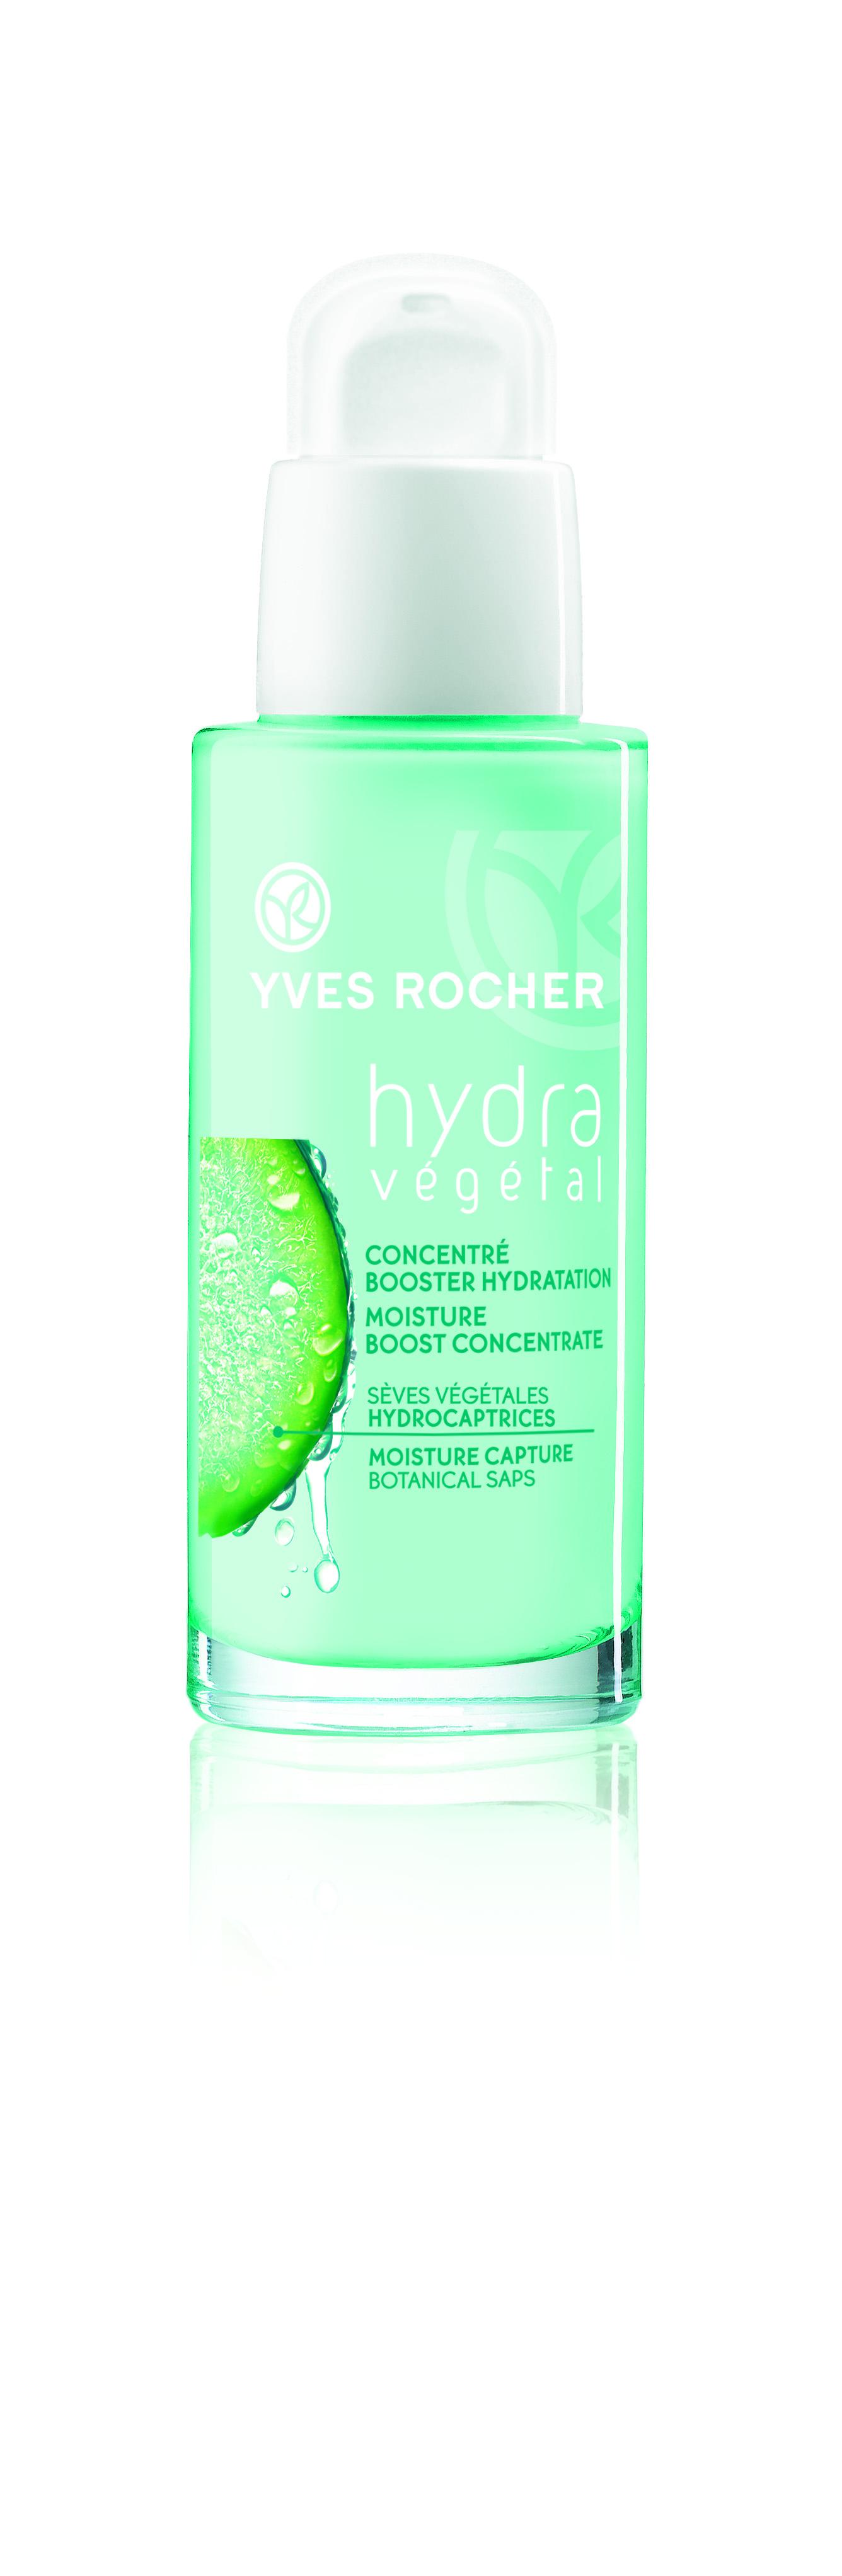 Hydra Végétal Moisture Boost Concentrate - Yves Rocher